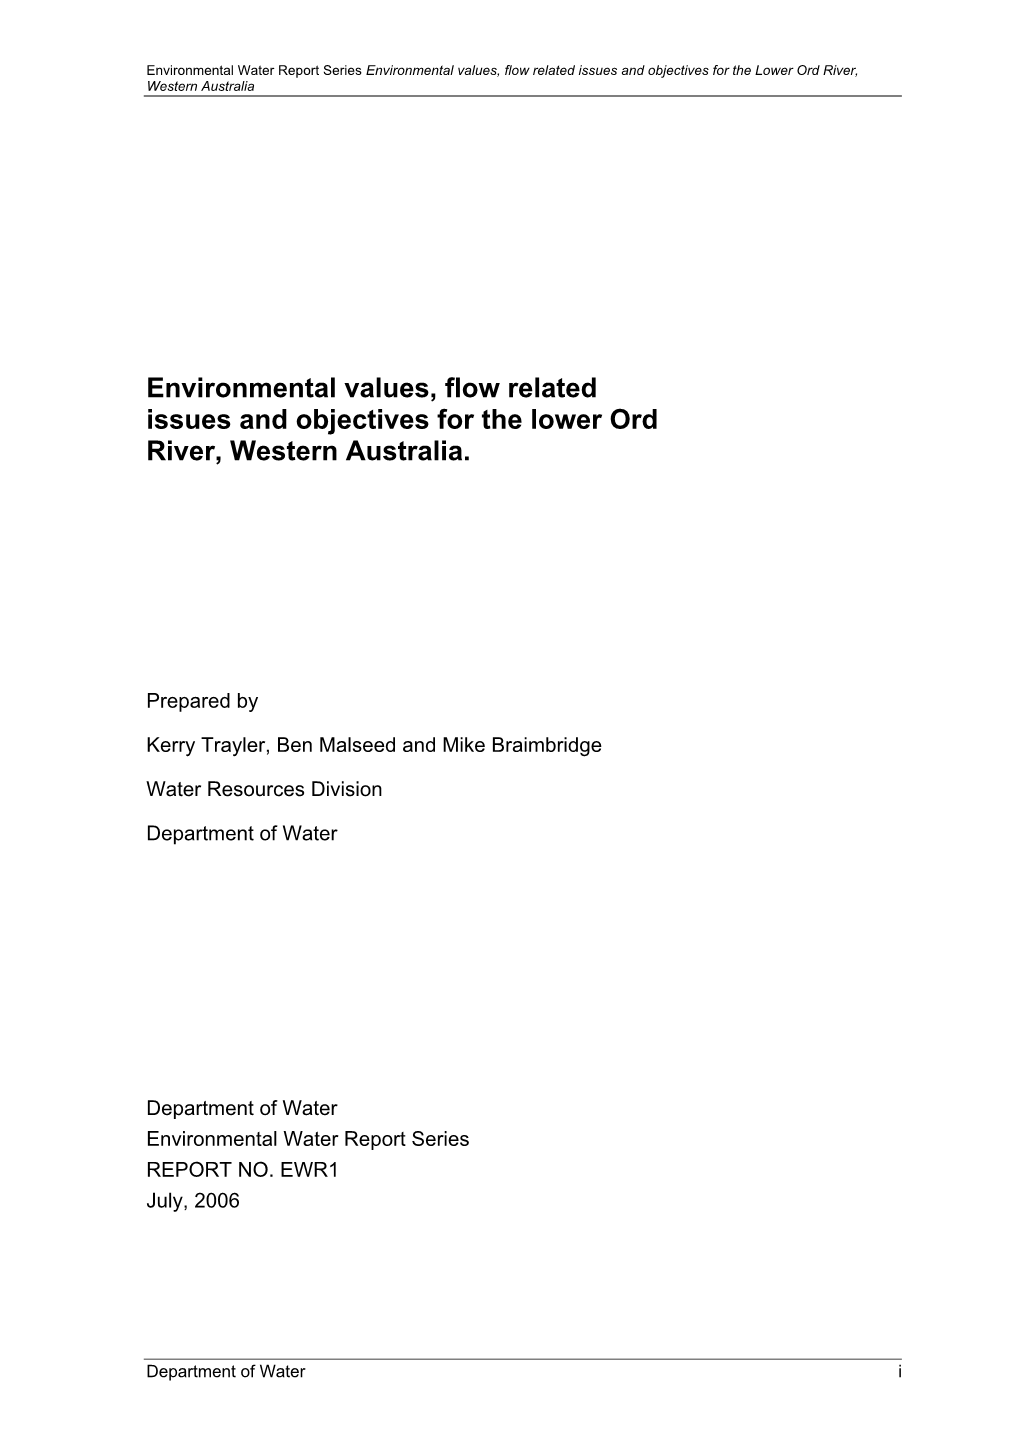 Environmental Values, Flow Related Issues and Objectives for the Lower Ord River, Western Australia